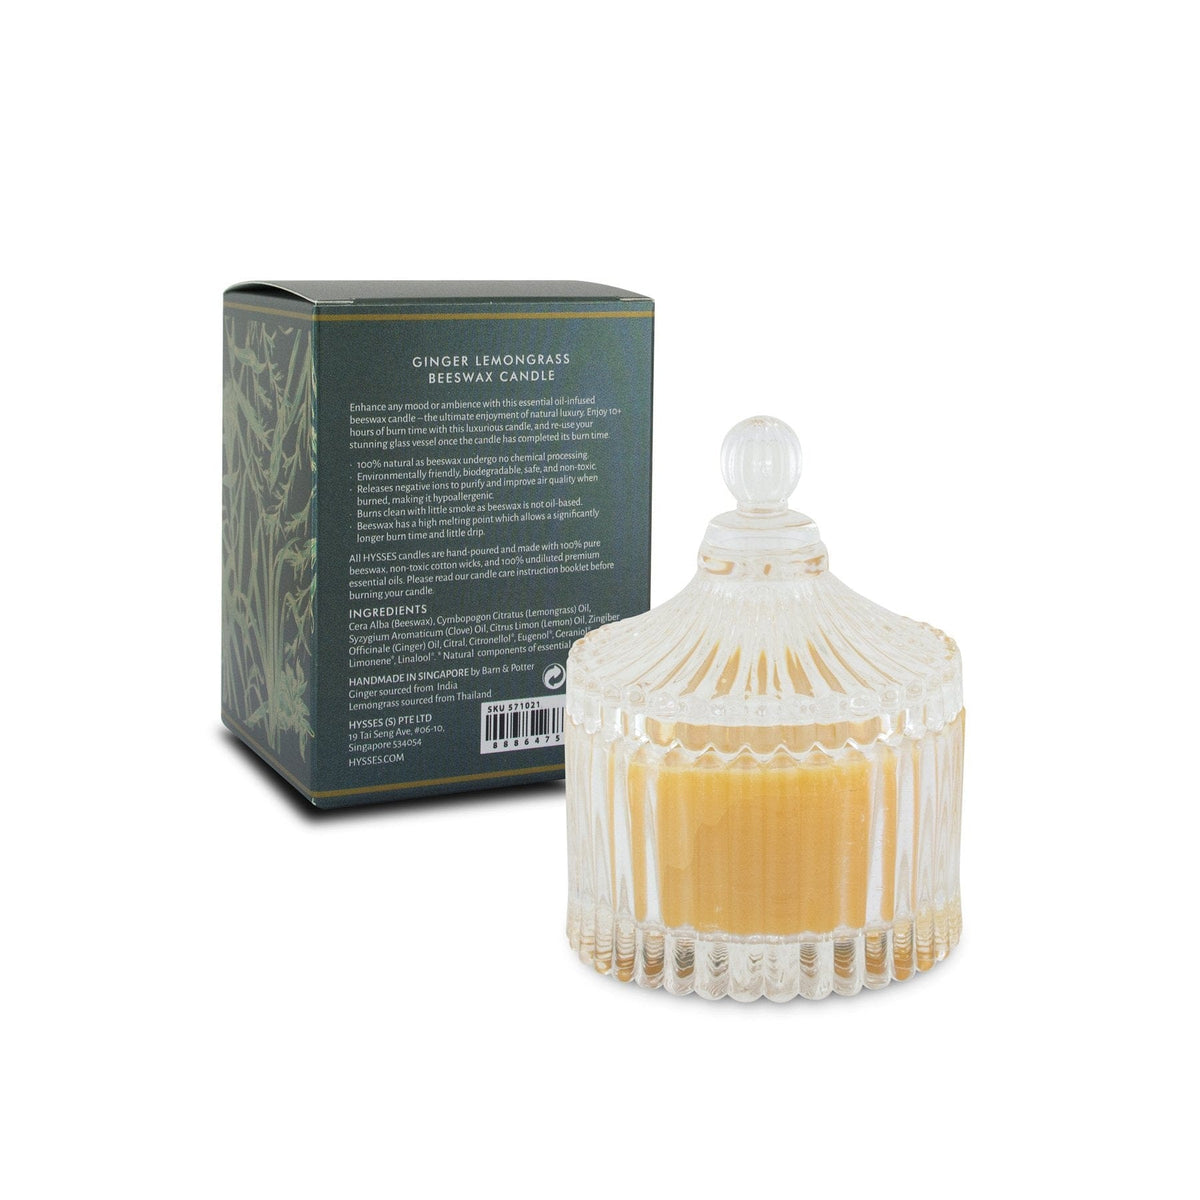 Beeswax Candle Ginger Lemongrass - Hysses Singapore